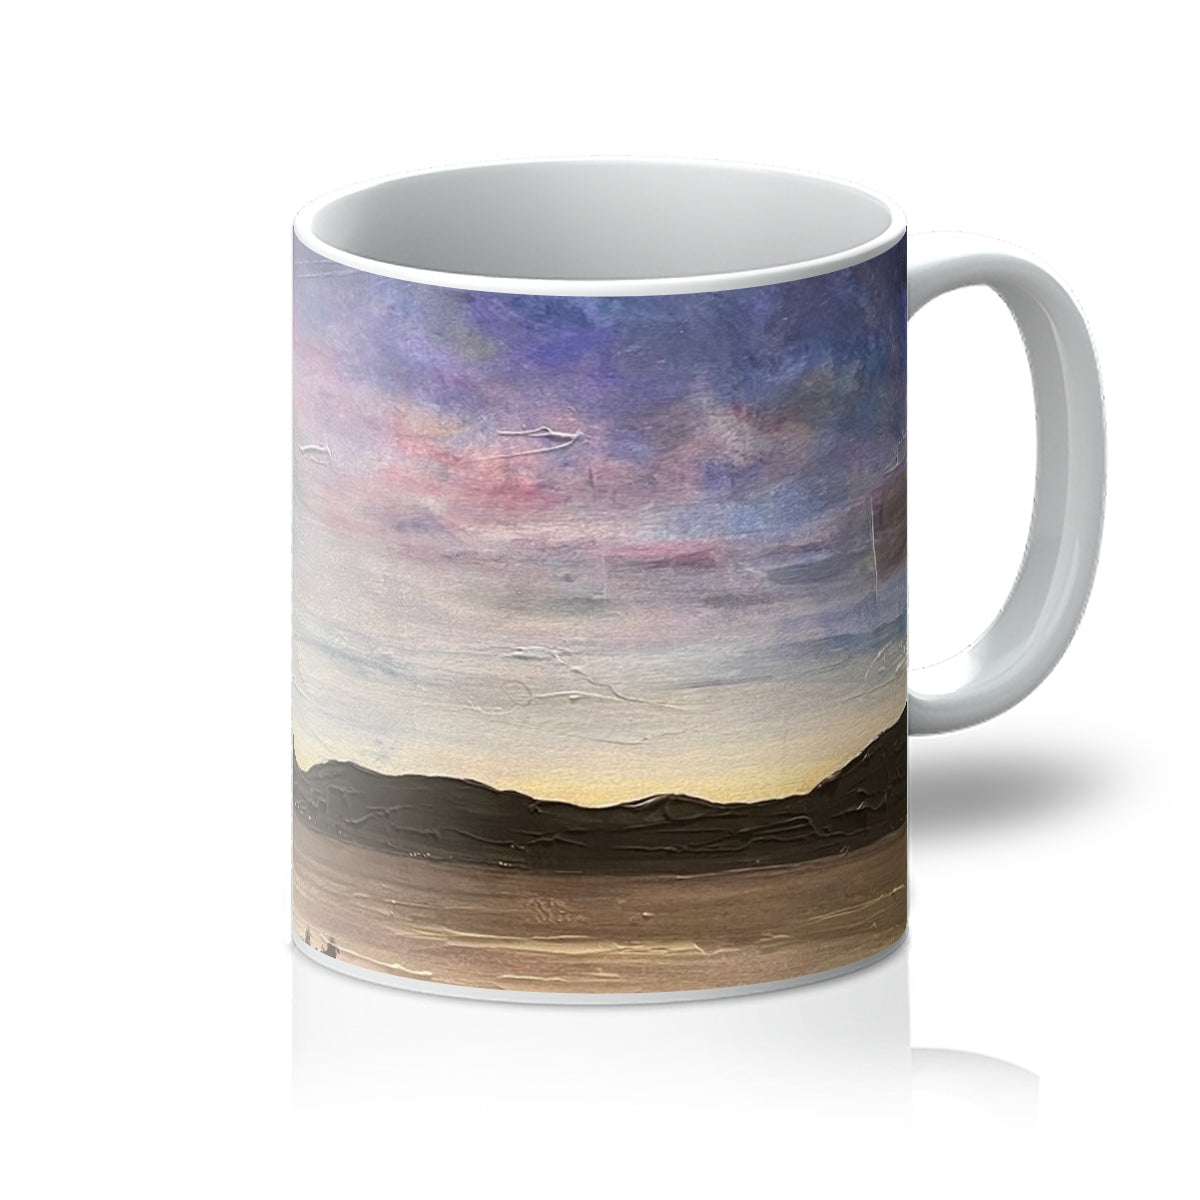 River Clyde Twilight Art Gifts Mug-Homeware-River Clyde Art Gallery-11oz-White-Paintings, Prints, Homeware, Art Gifts From Scotland By Scottish Artist Kevin Hunter